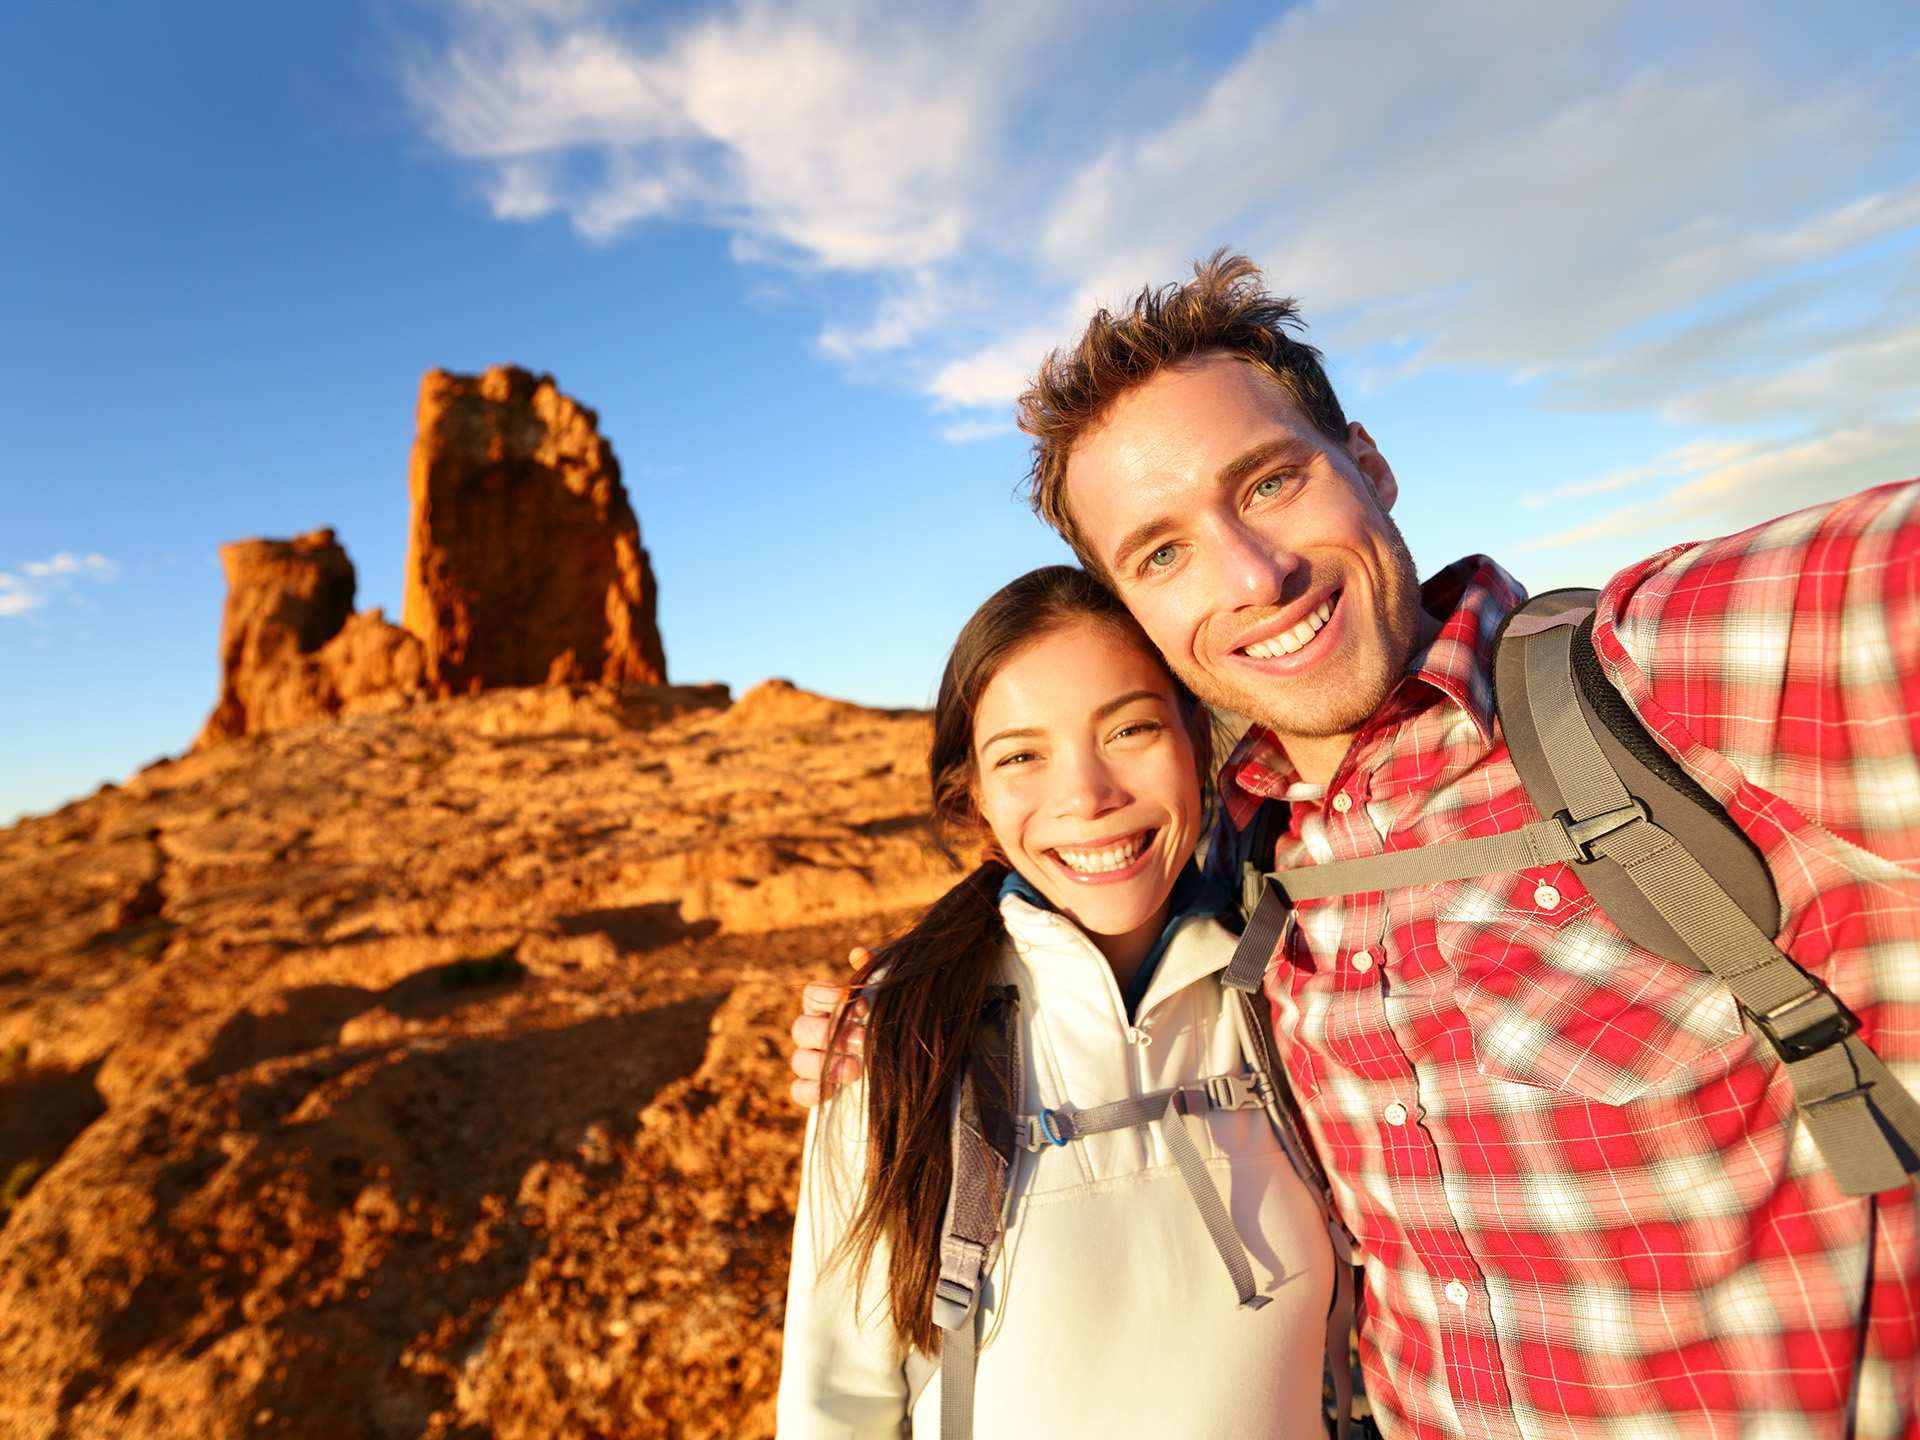 Toronto's Outdoor Adventure Show | Couple smiling together in the desert